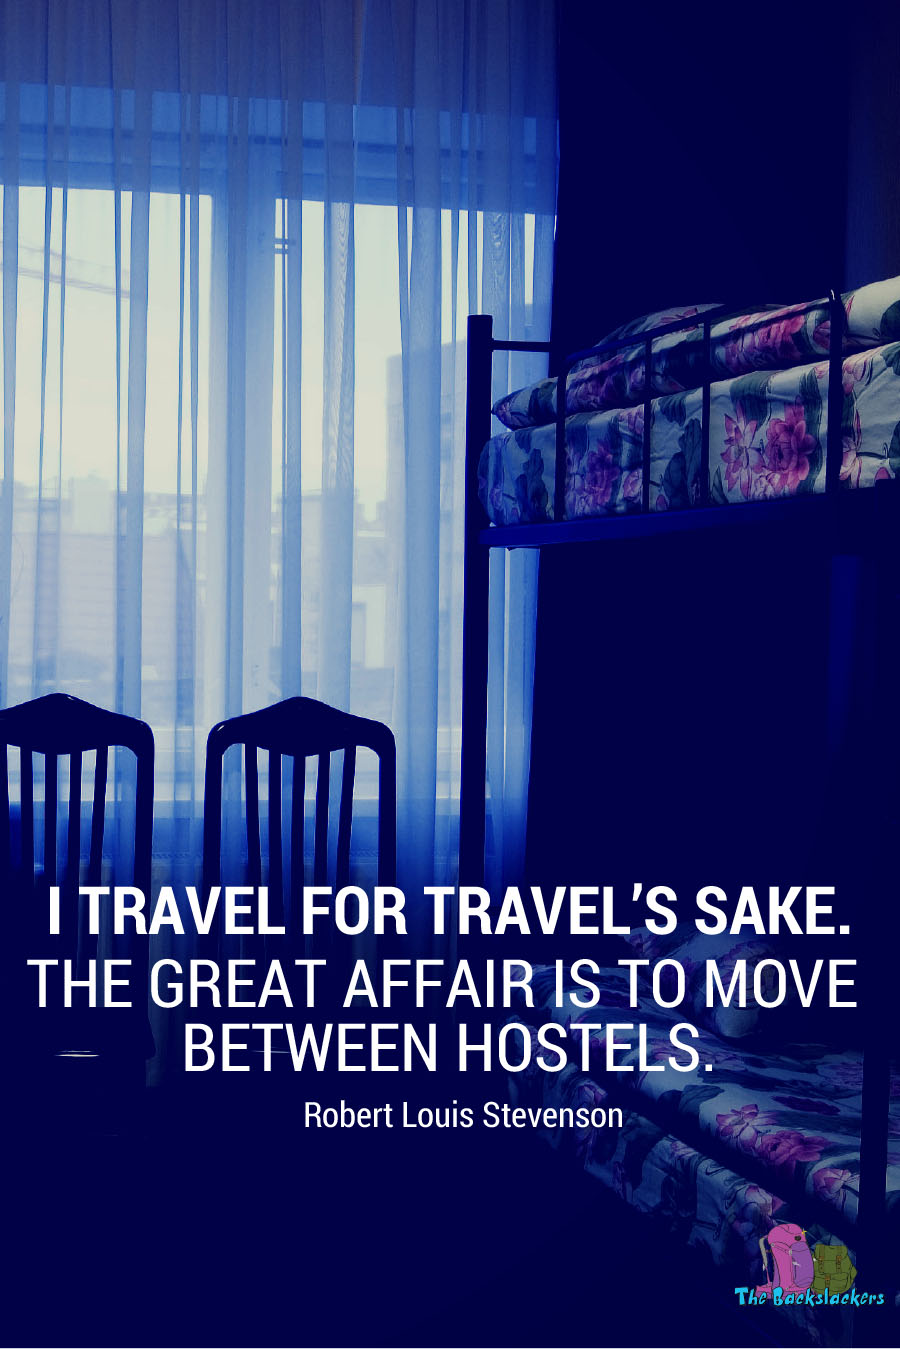 I Travel For Travel’s Sake. The Great Affair Is To Move Between Hostels. – Robert Louis Stevenson | 10 Travel Quotes for Backpackers (Like You've Never Heard Them Before)